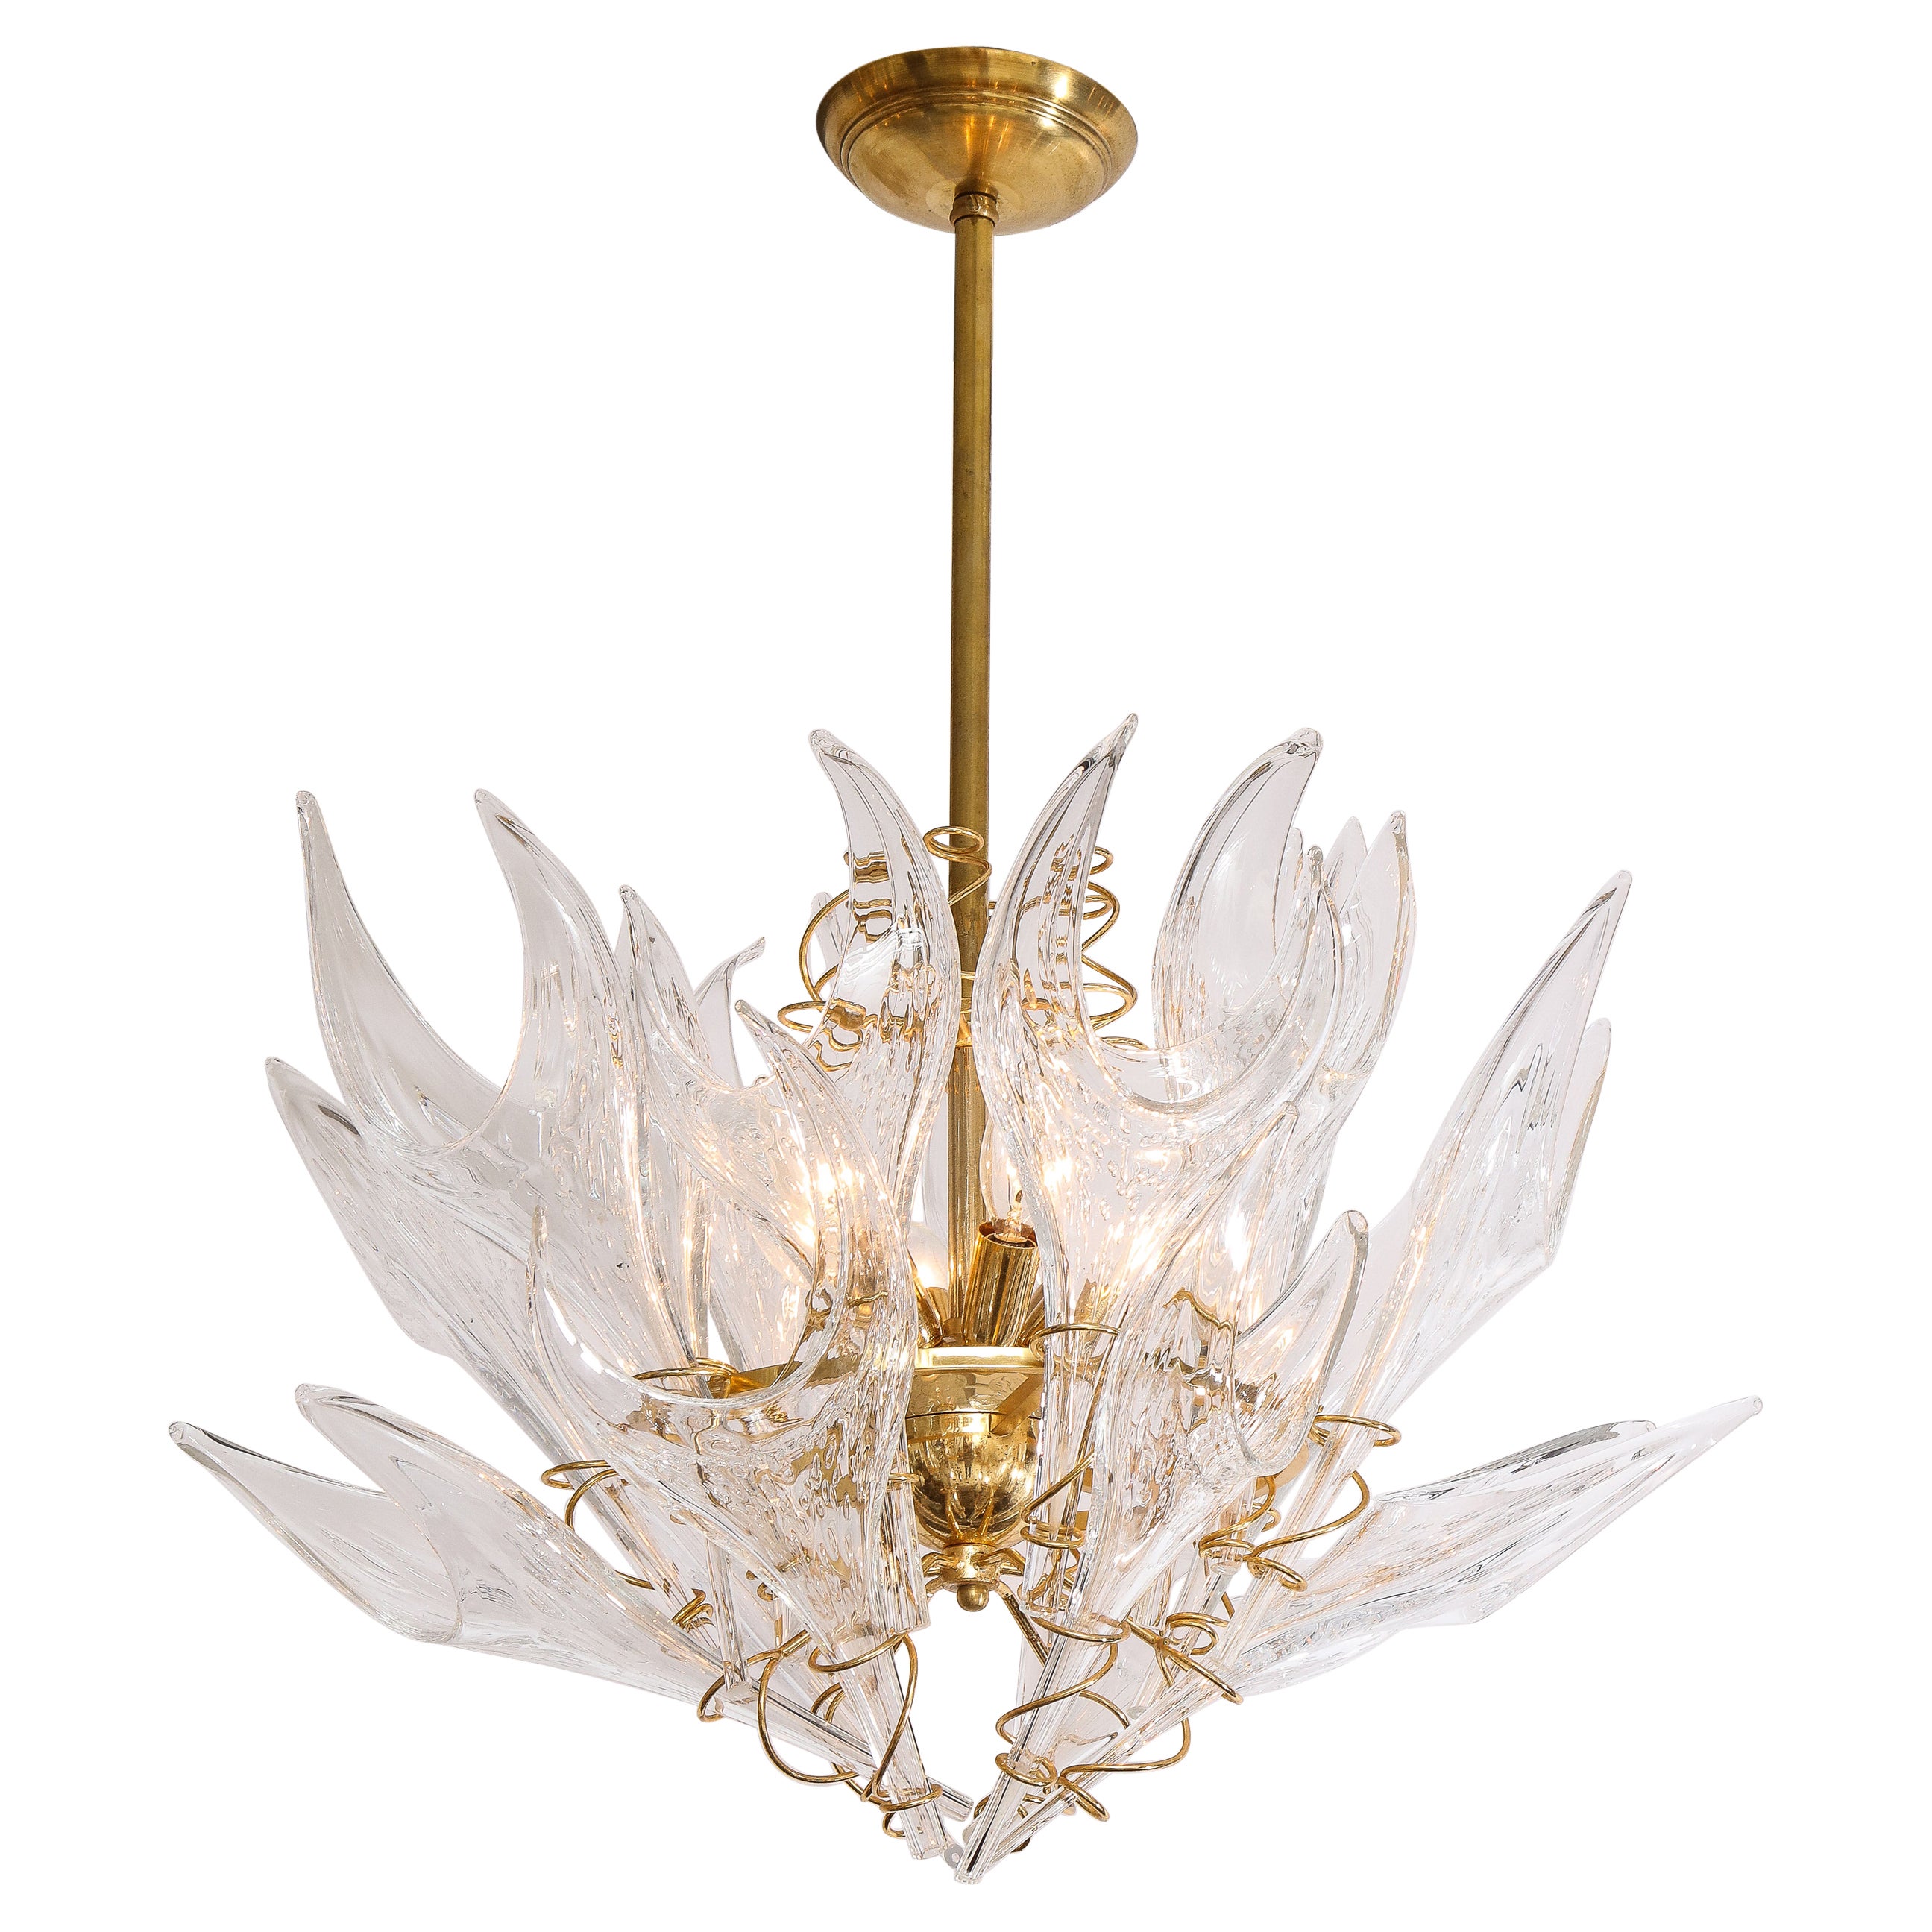 1970's Mid-Century Modern Hand Blown "Flame" Chandelier by Mazzega For Sale